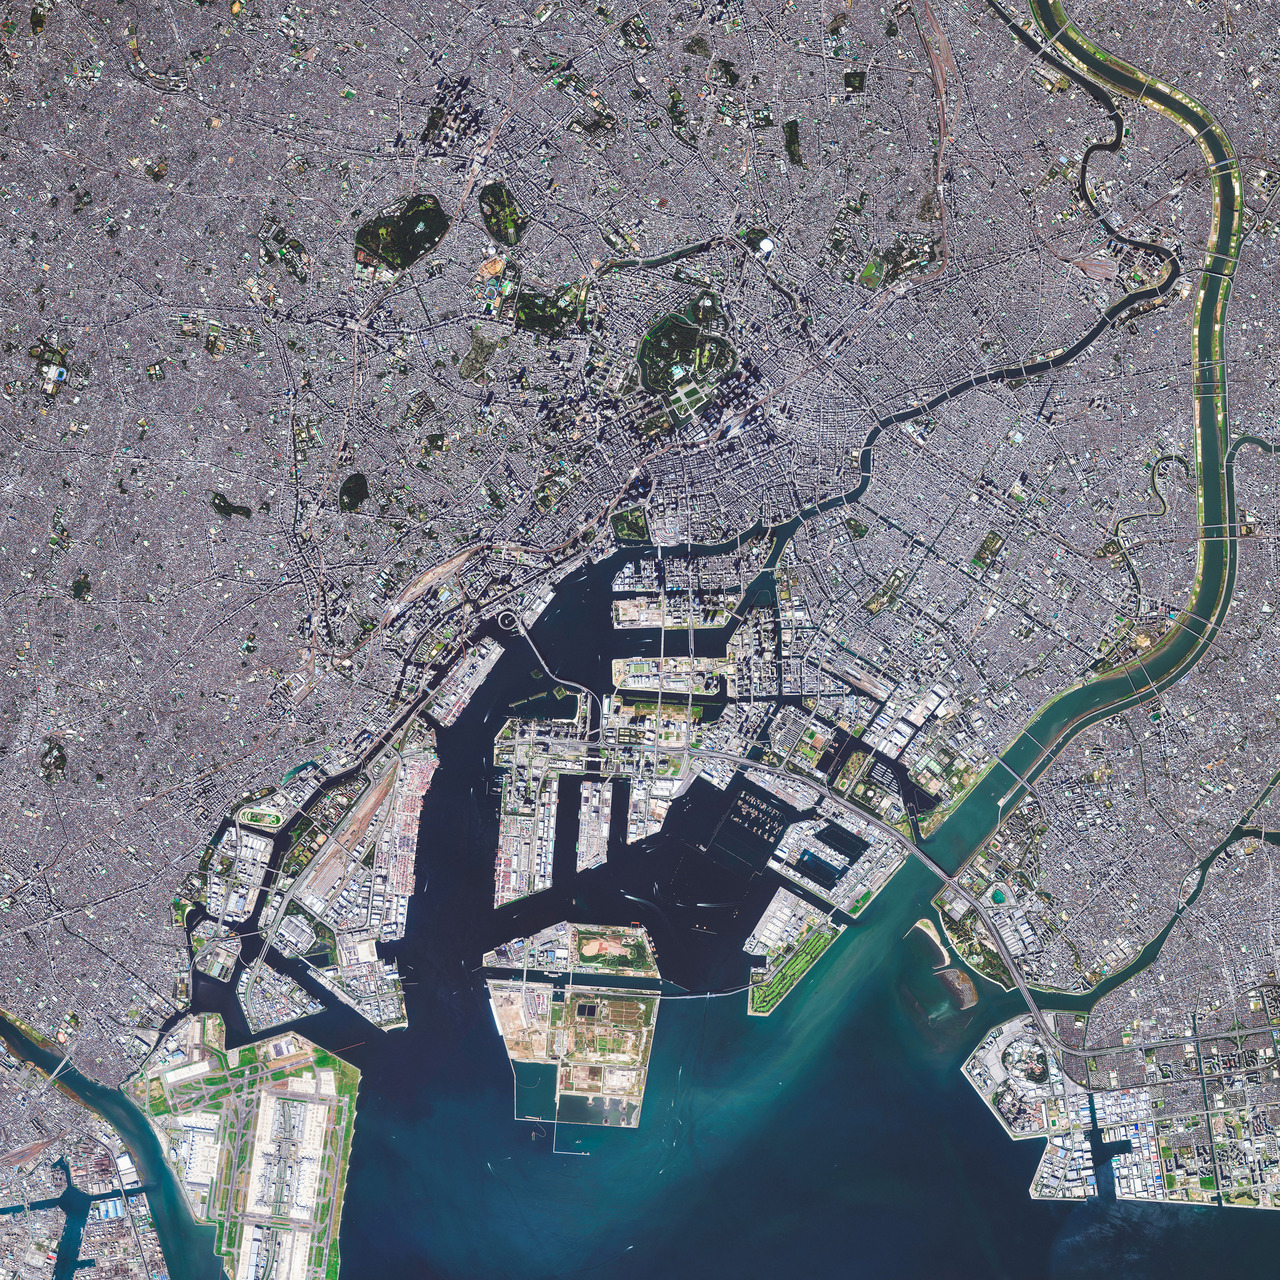 dailyoverview:
“ Tokyo is the capital of Japan and the most populous metropolitan area in the world, with upwards of 38 million residents. Also, as of 2014, it had the largest metropolitan economy in the world, boasting a total gross domestic product...